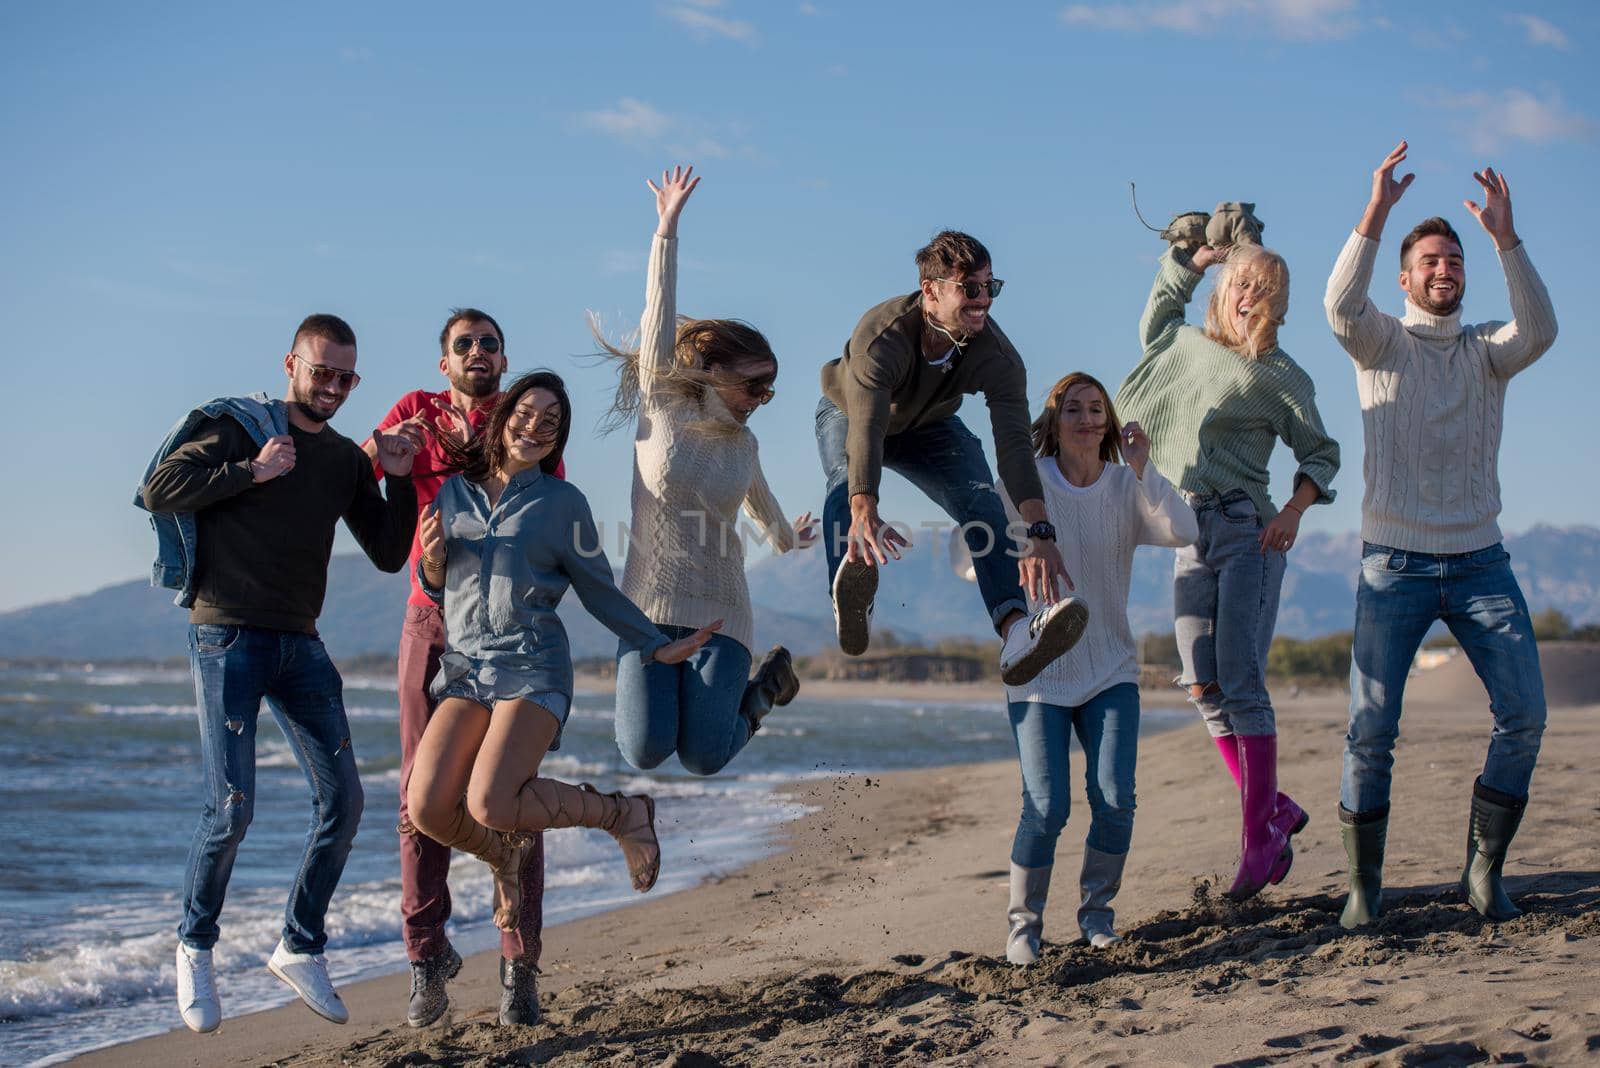 Group of excited young friends jumping together at sunny autumn beach